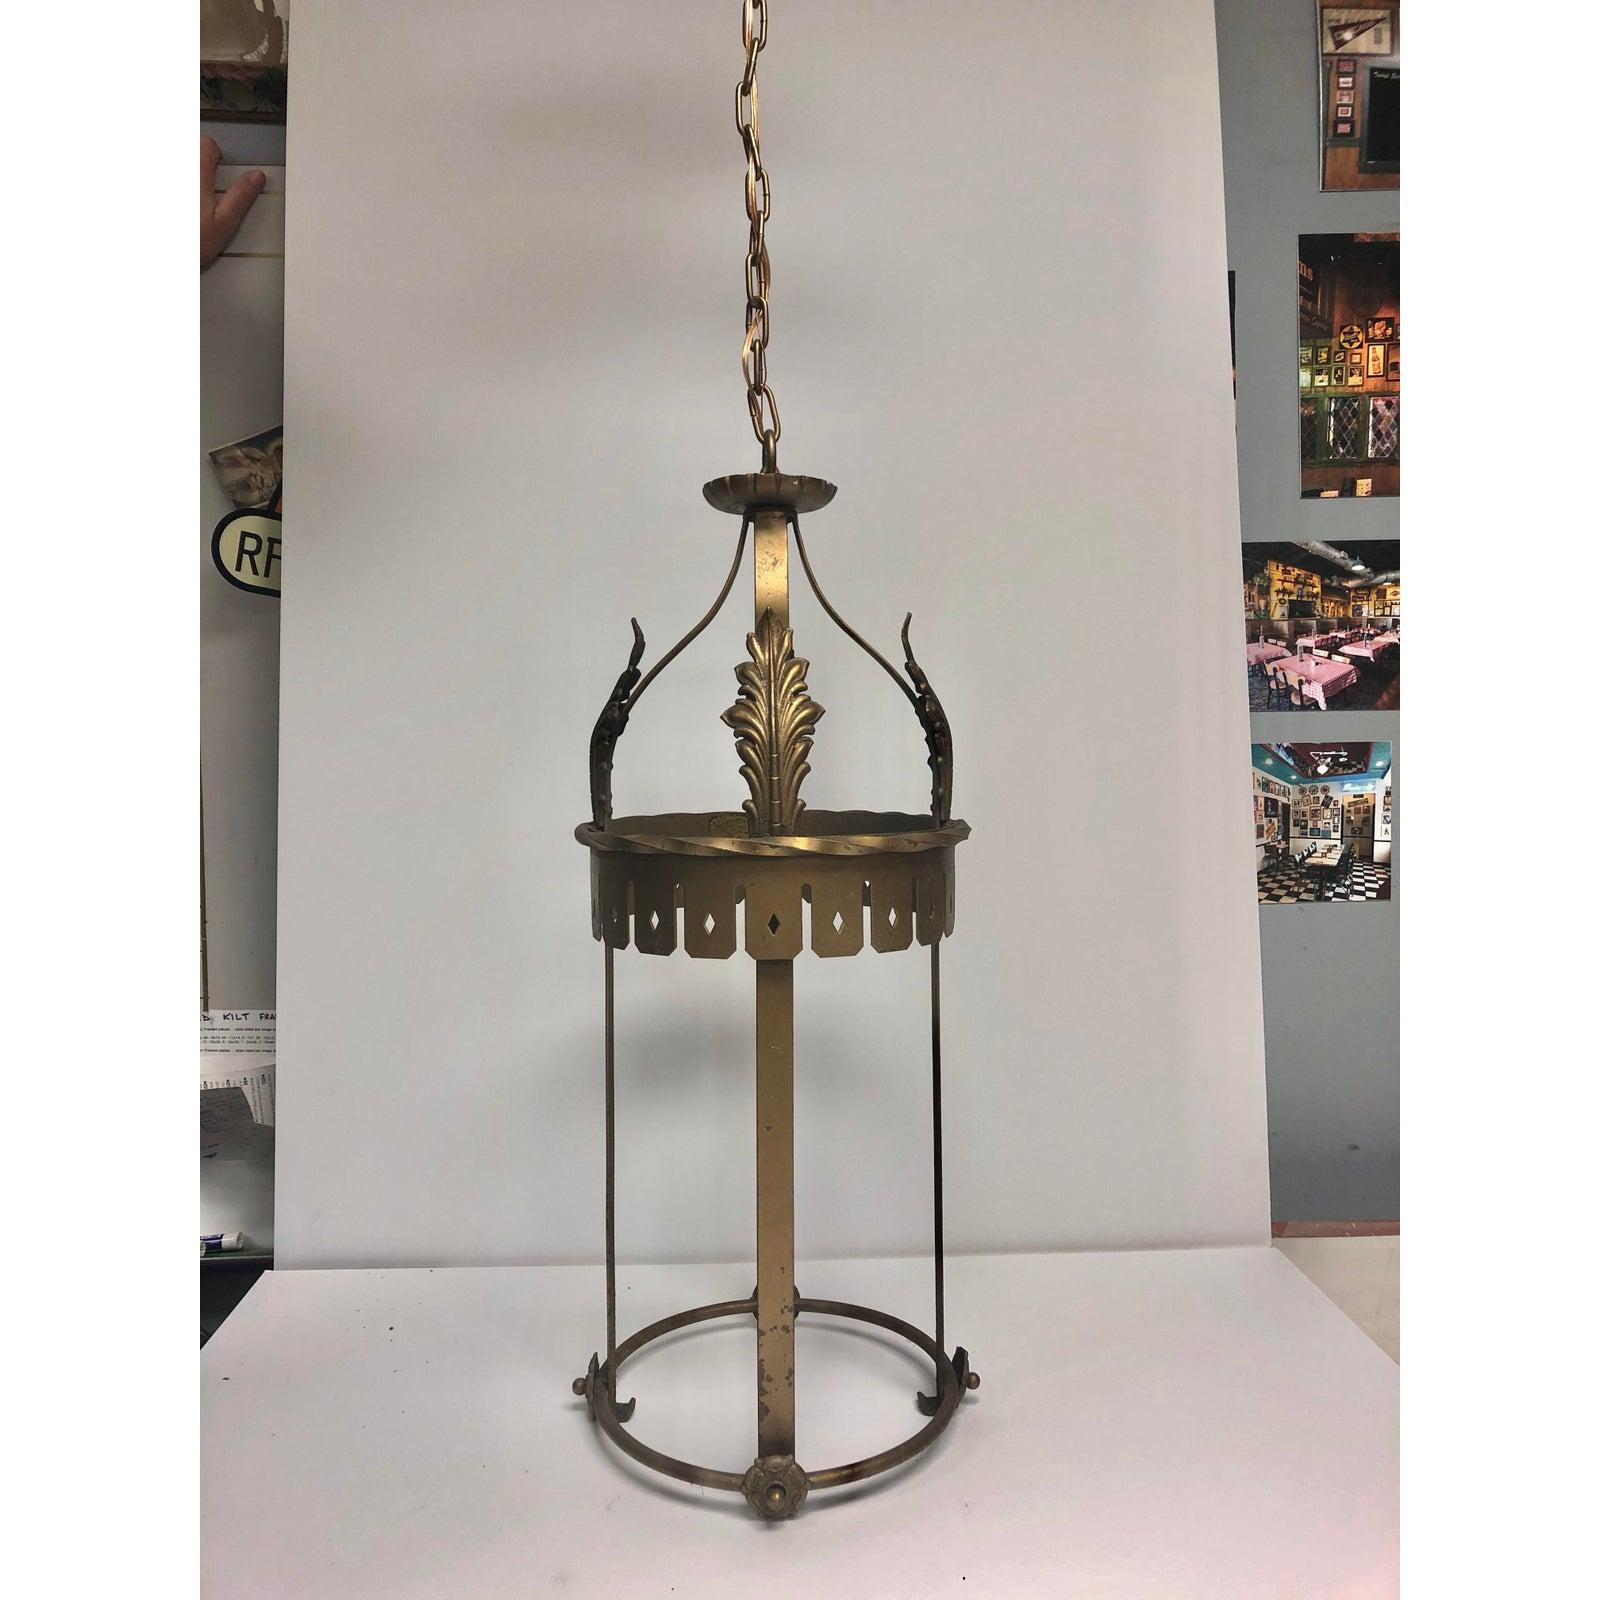 Antique French decorative lantern. Fixture H 30.5”, chain 33”. Recently rewired. It holds one bulb.